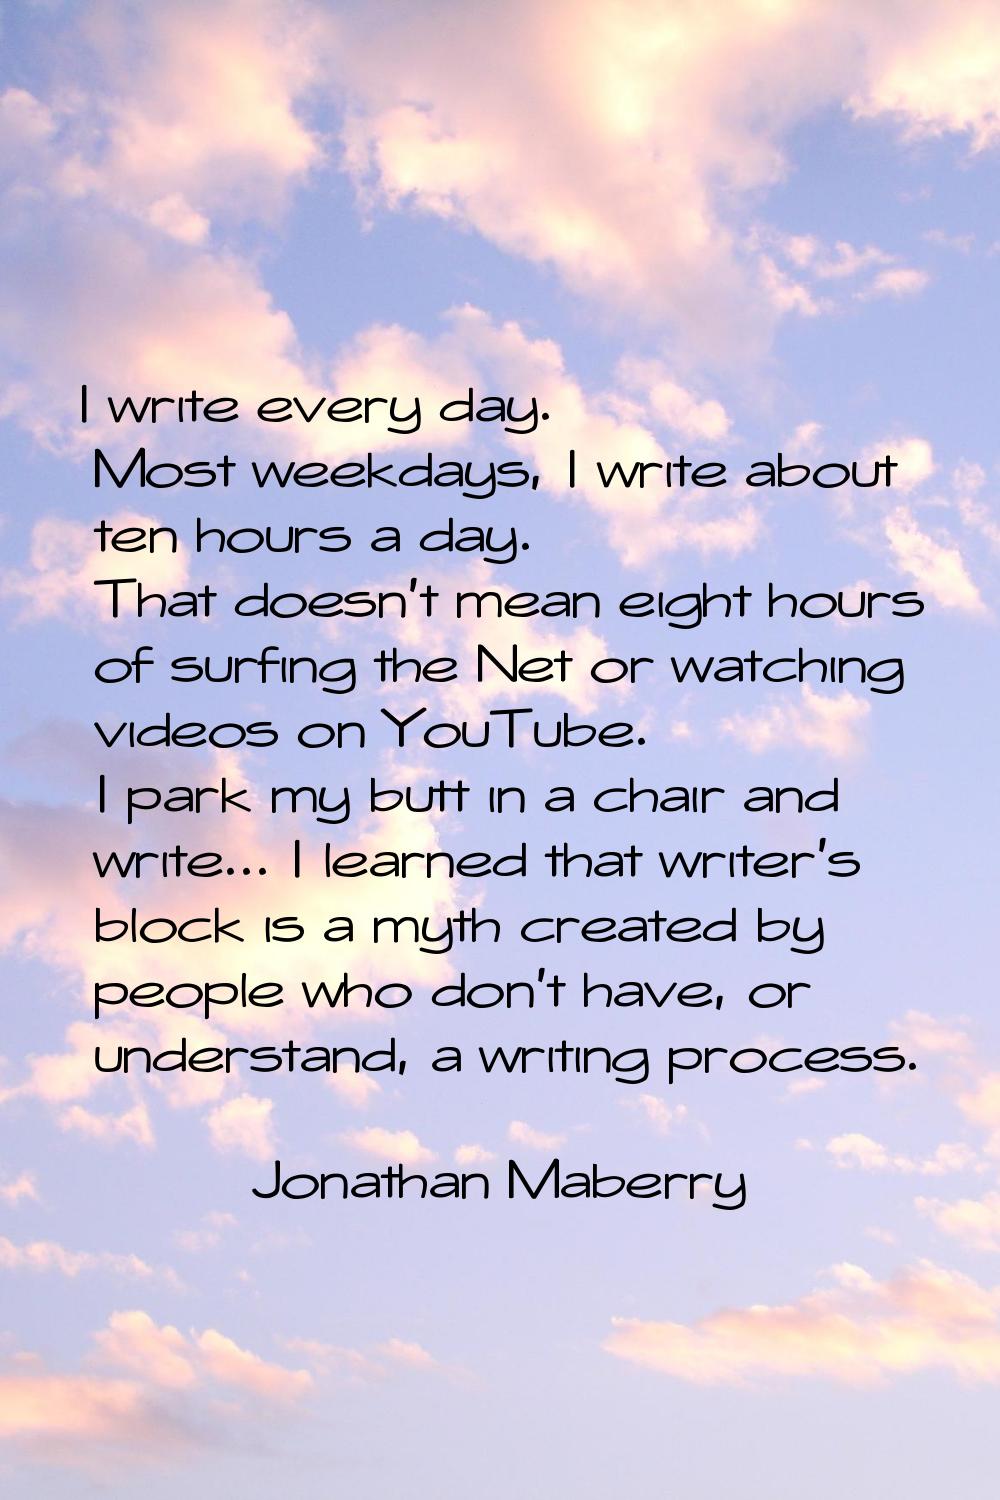 I write every day. Most weekdays, I write about ten hours a day. That doesn't mean eight hours of s